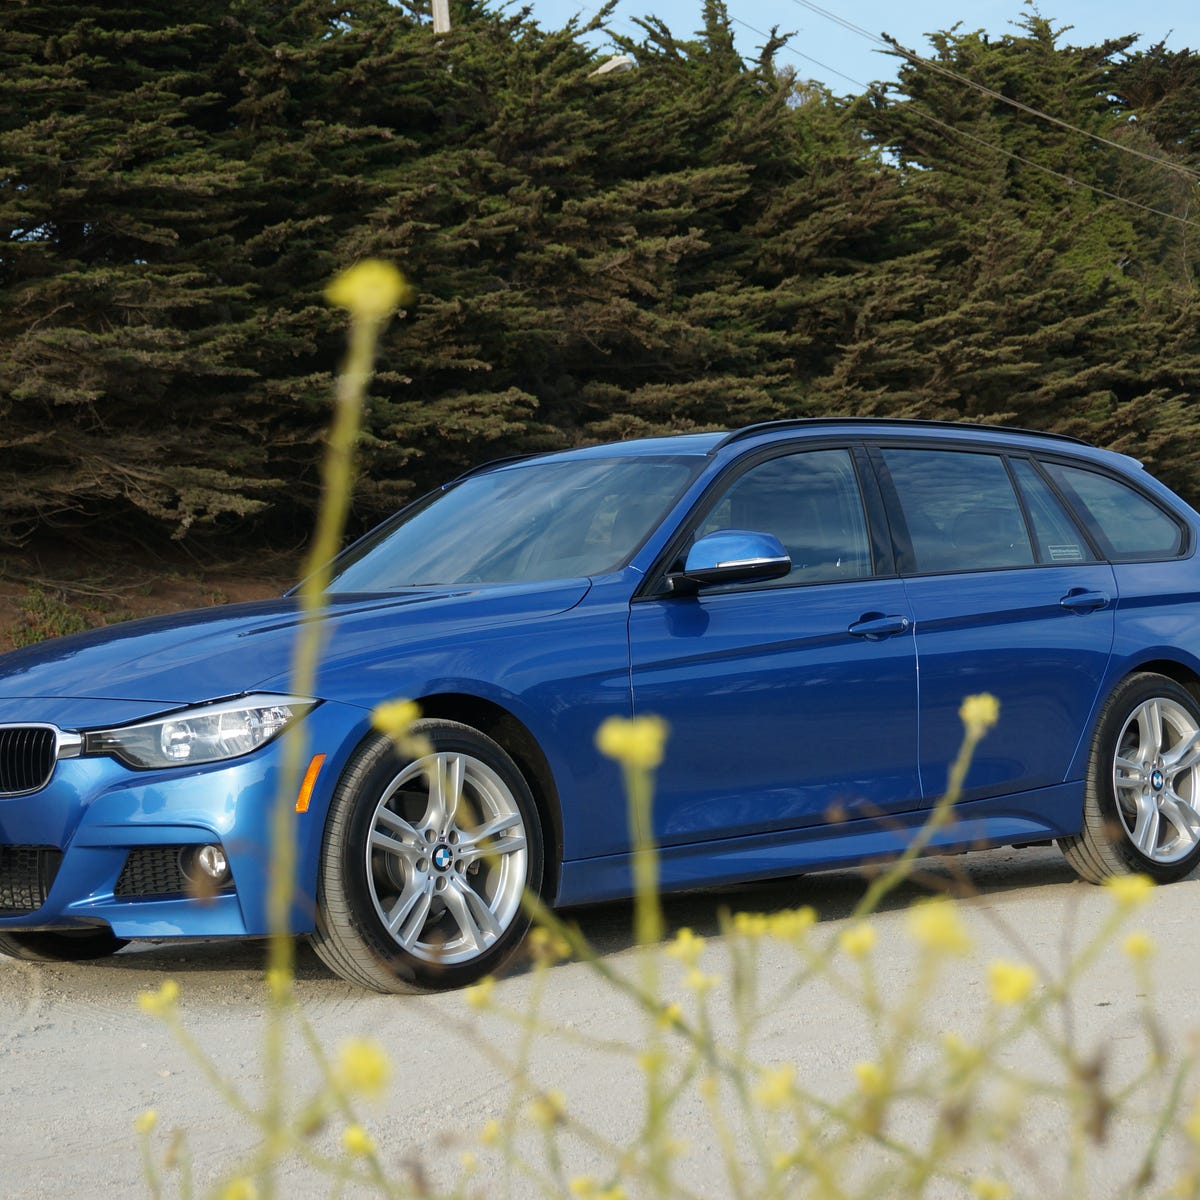 2014 BMW 328d xDrive Sports Wagon review: BMW's diesel wagon is a 40-mpg  corner carver - CNET